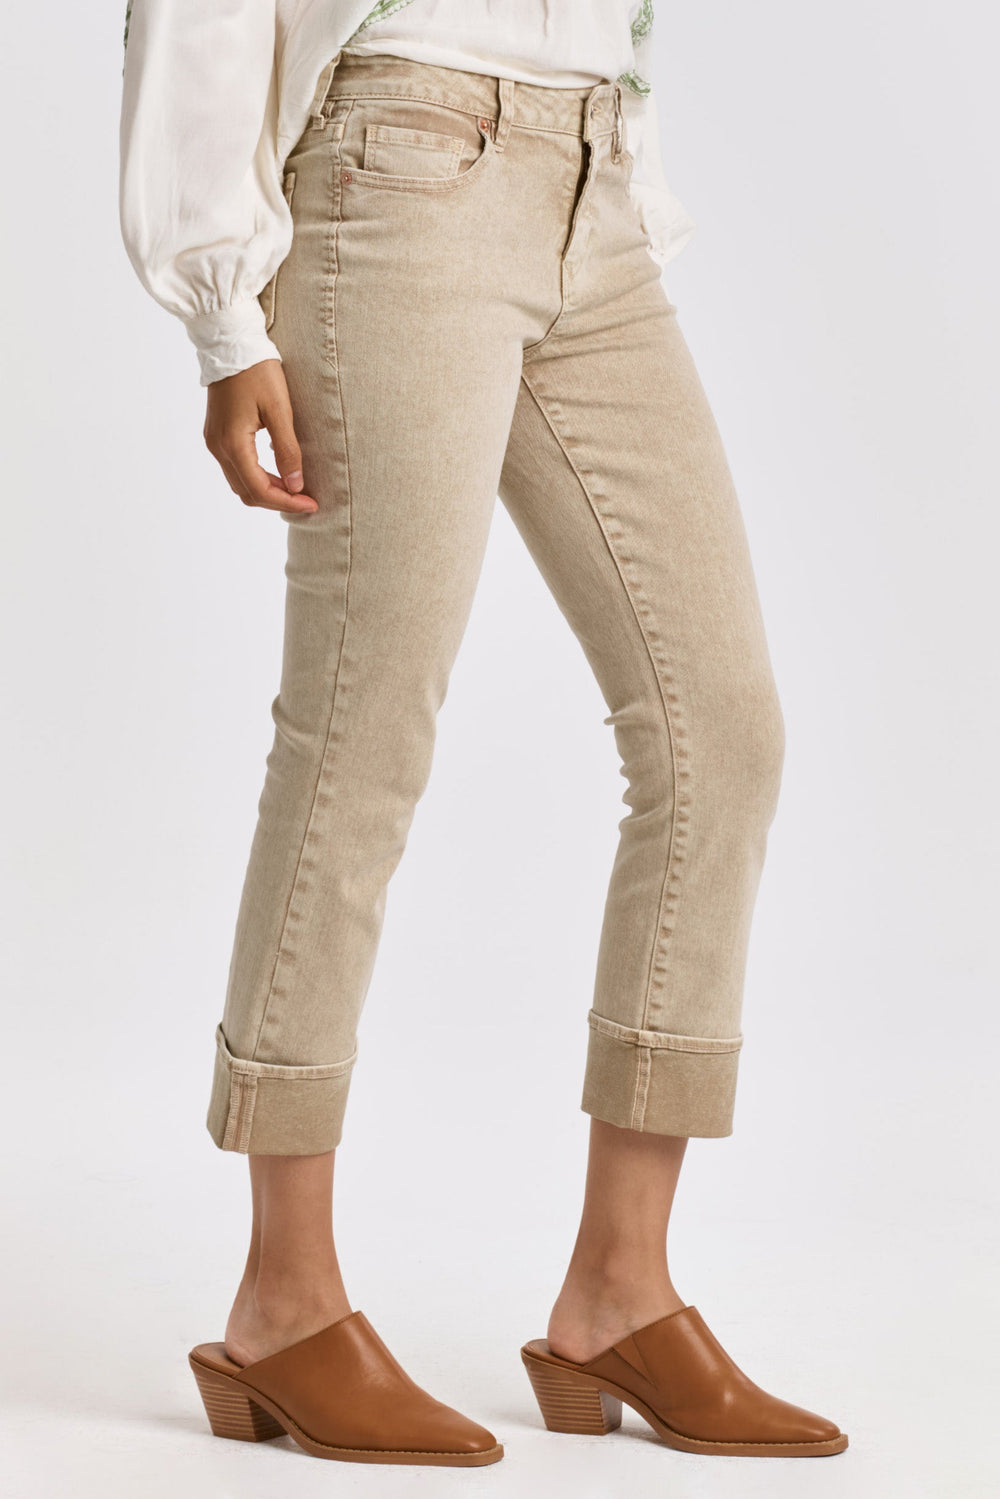 blaire-high-rise-cuffed-slim-straight-jeans-golden-road